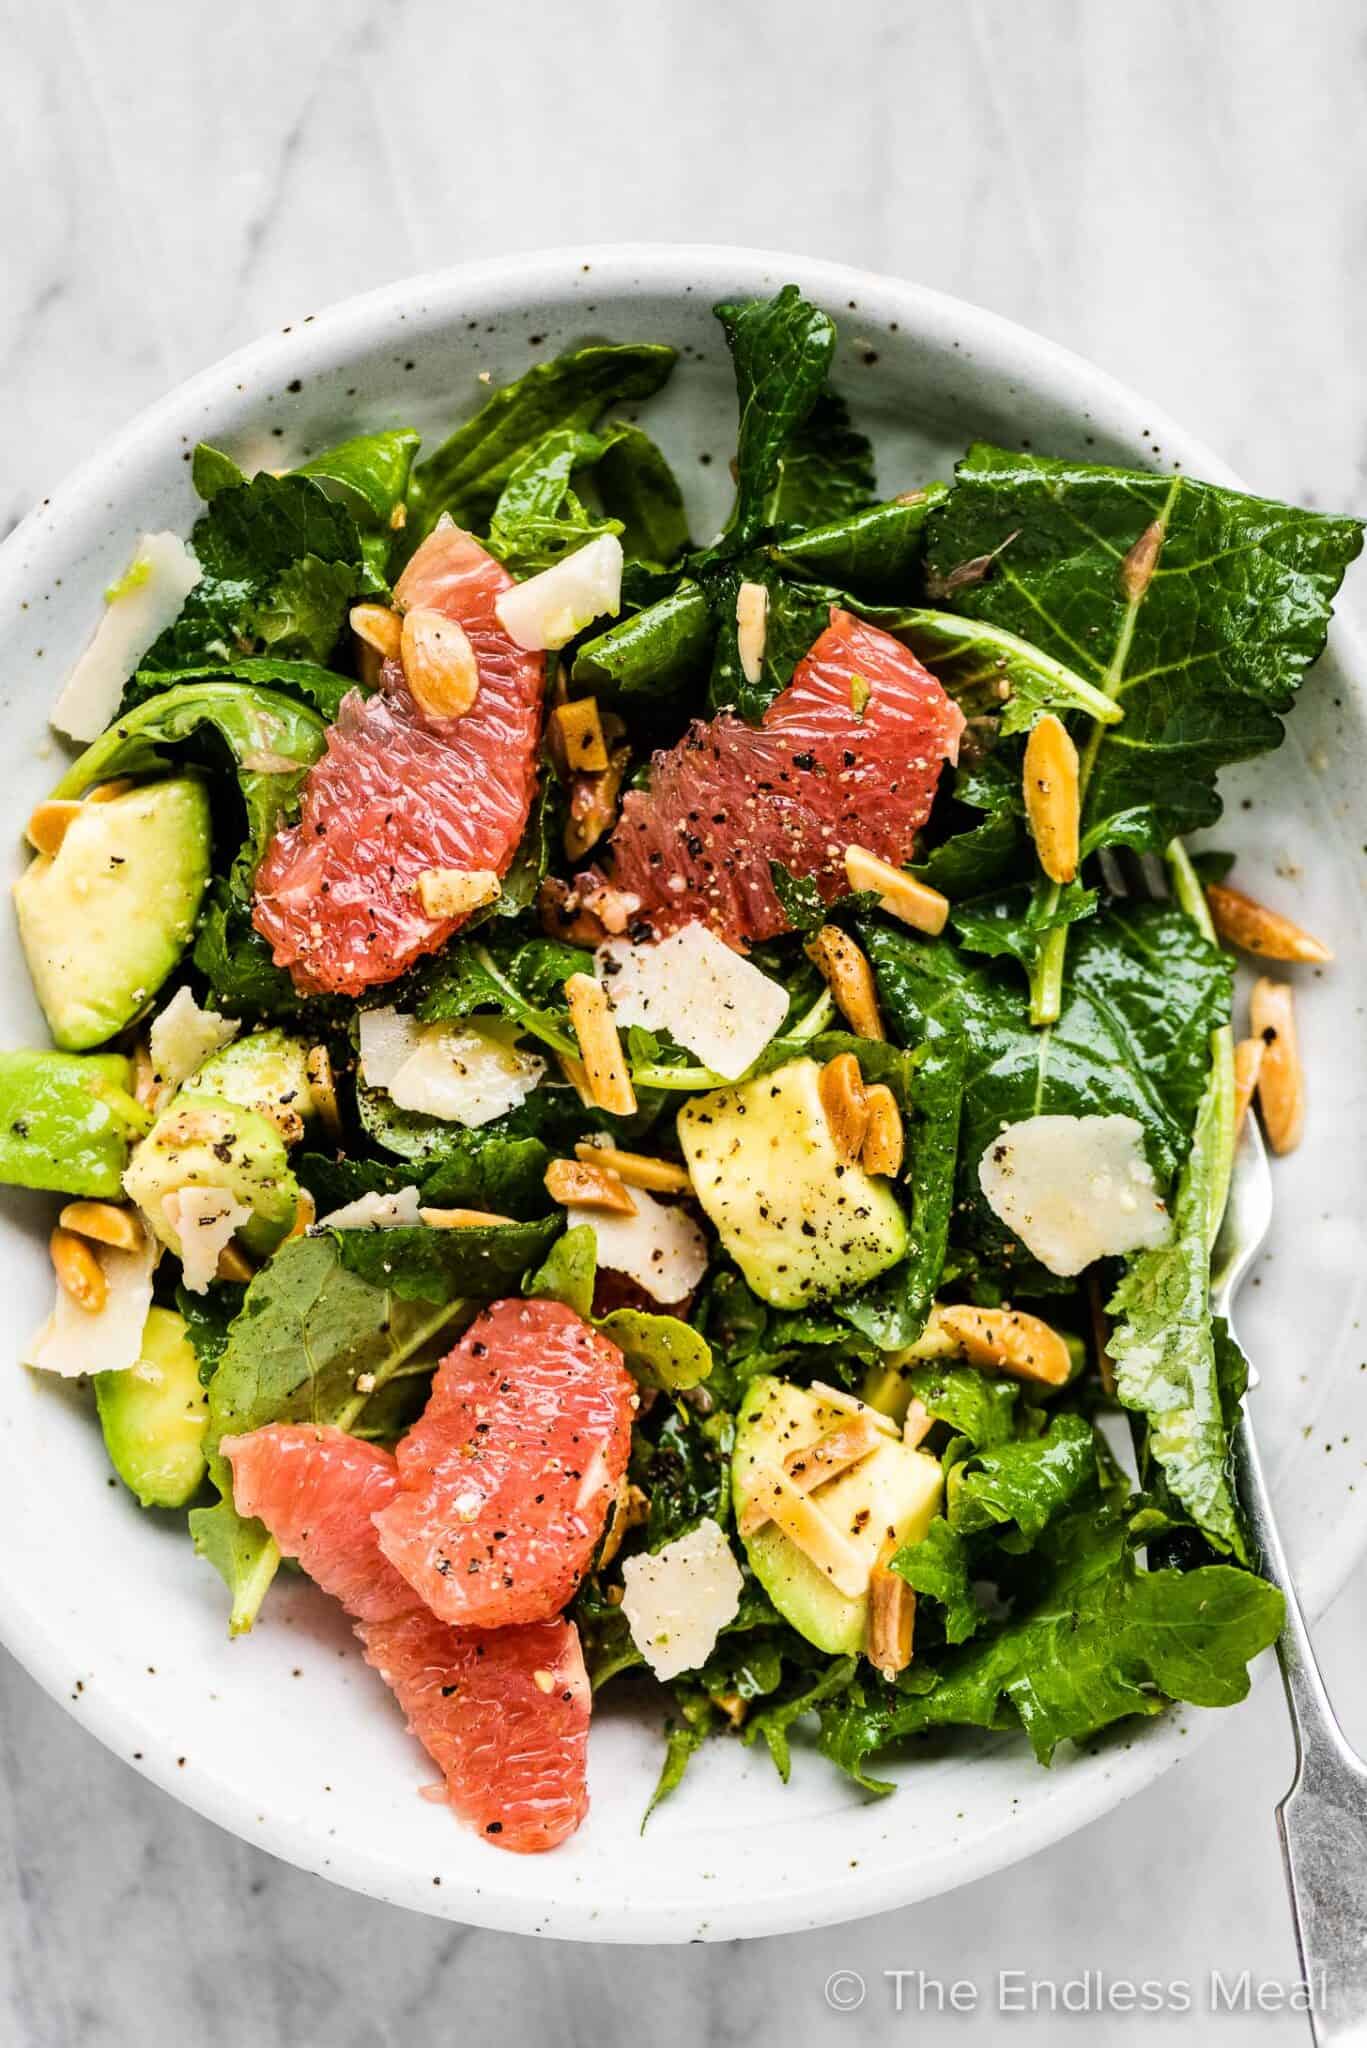 Baby kale salad on a plate with grapefruit, avocados, and almonds.